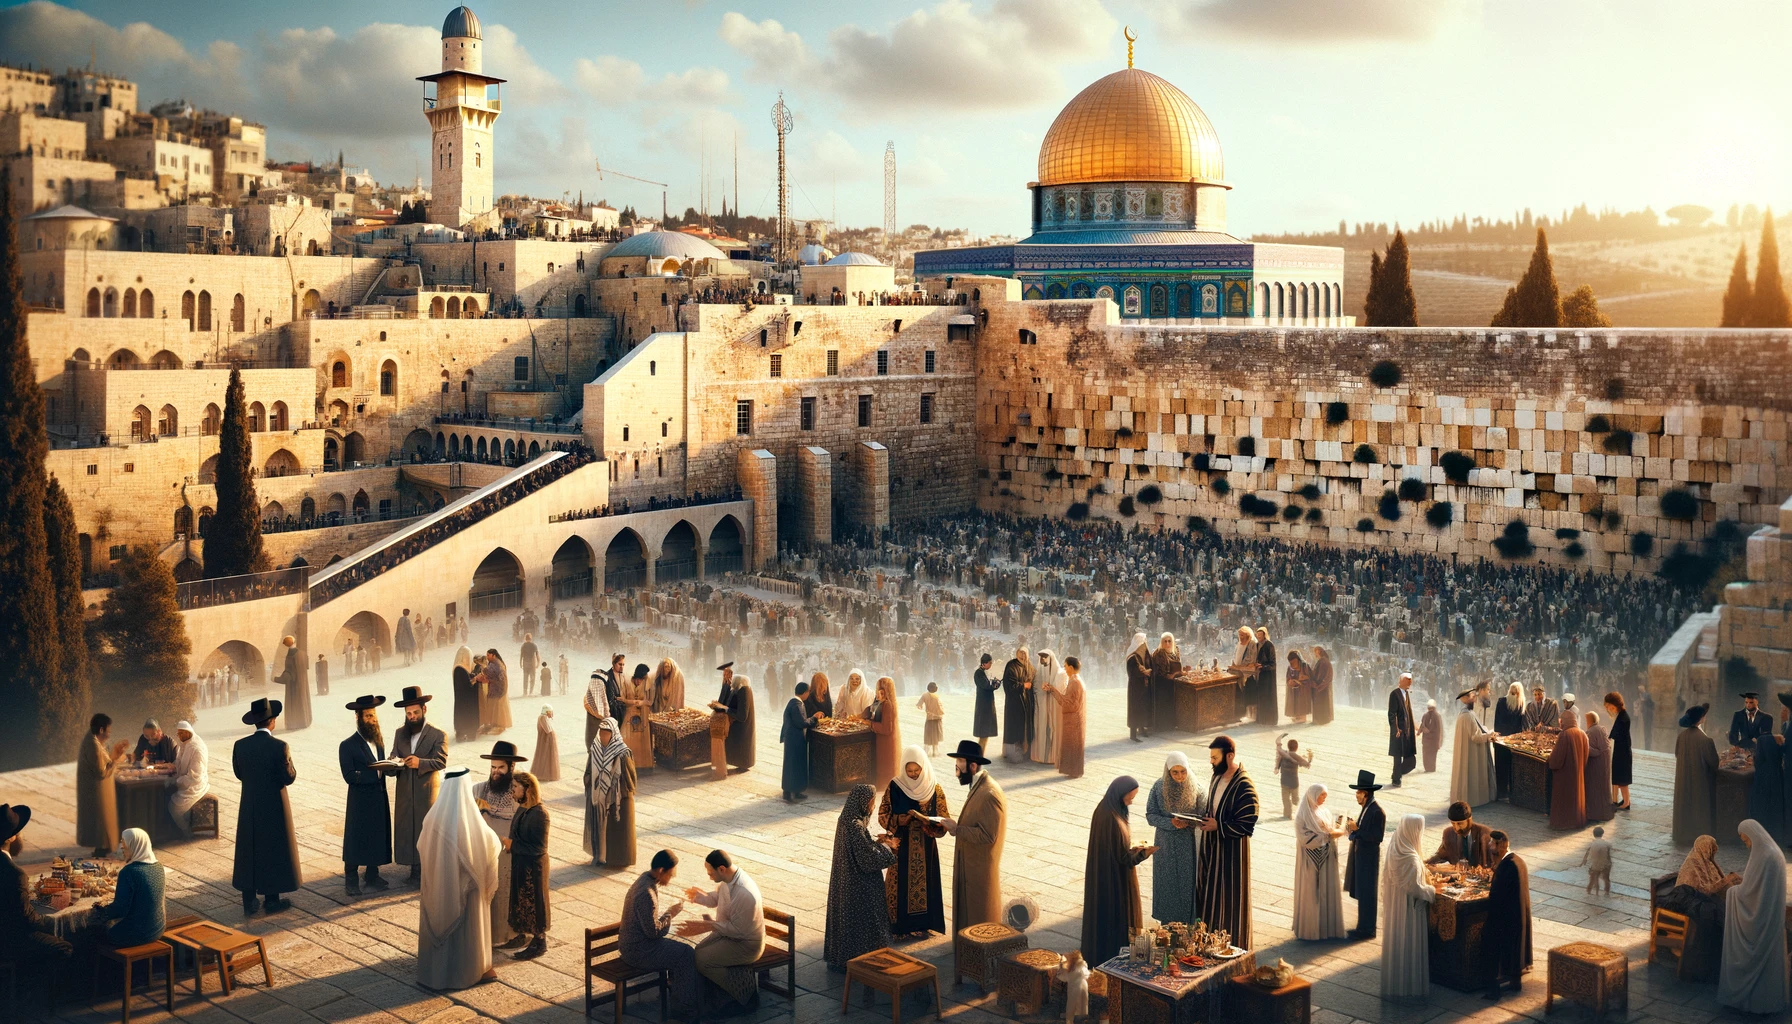 Harmony on the Temple Mount or Preparing for the End?